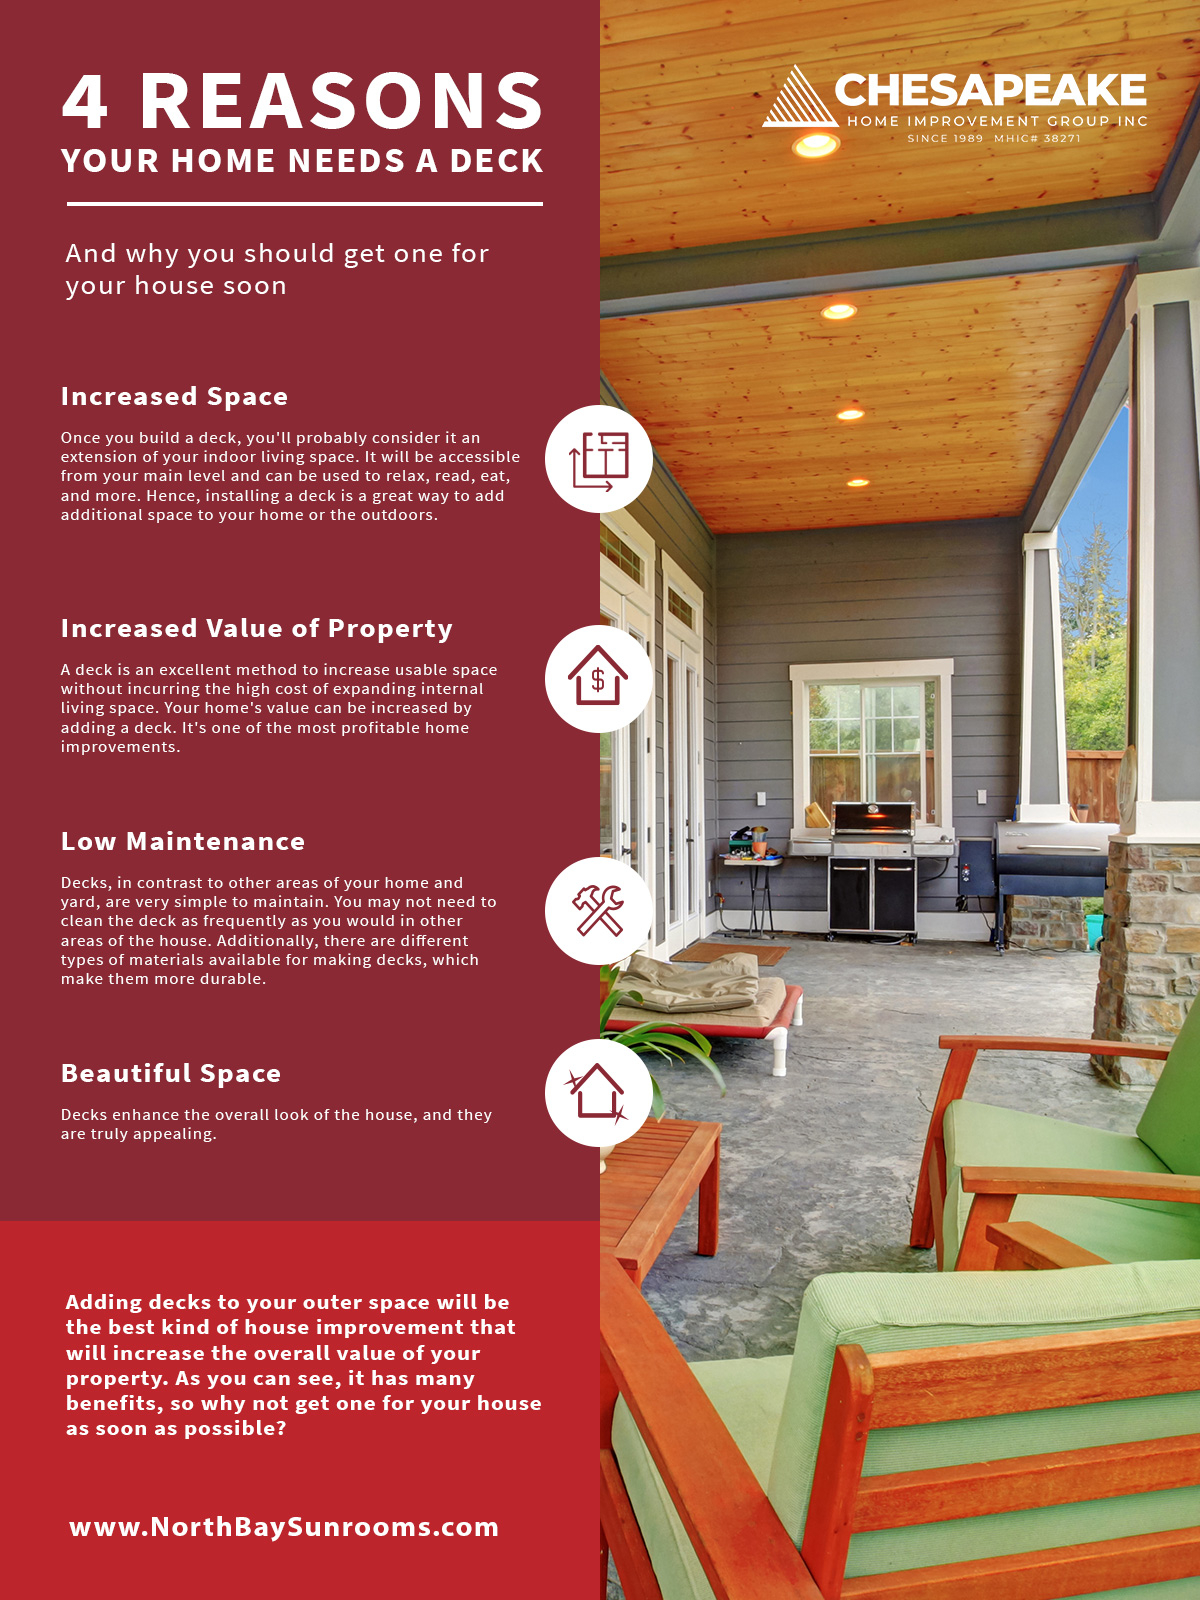 4-reasons-your-home-needs-a-deck-infographic.jpg